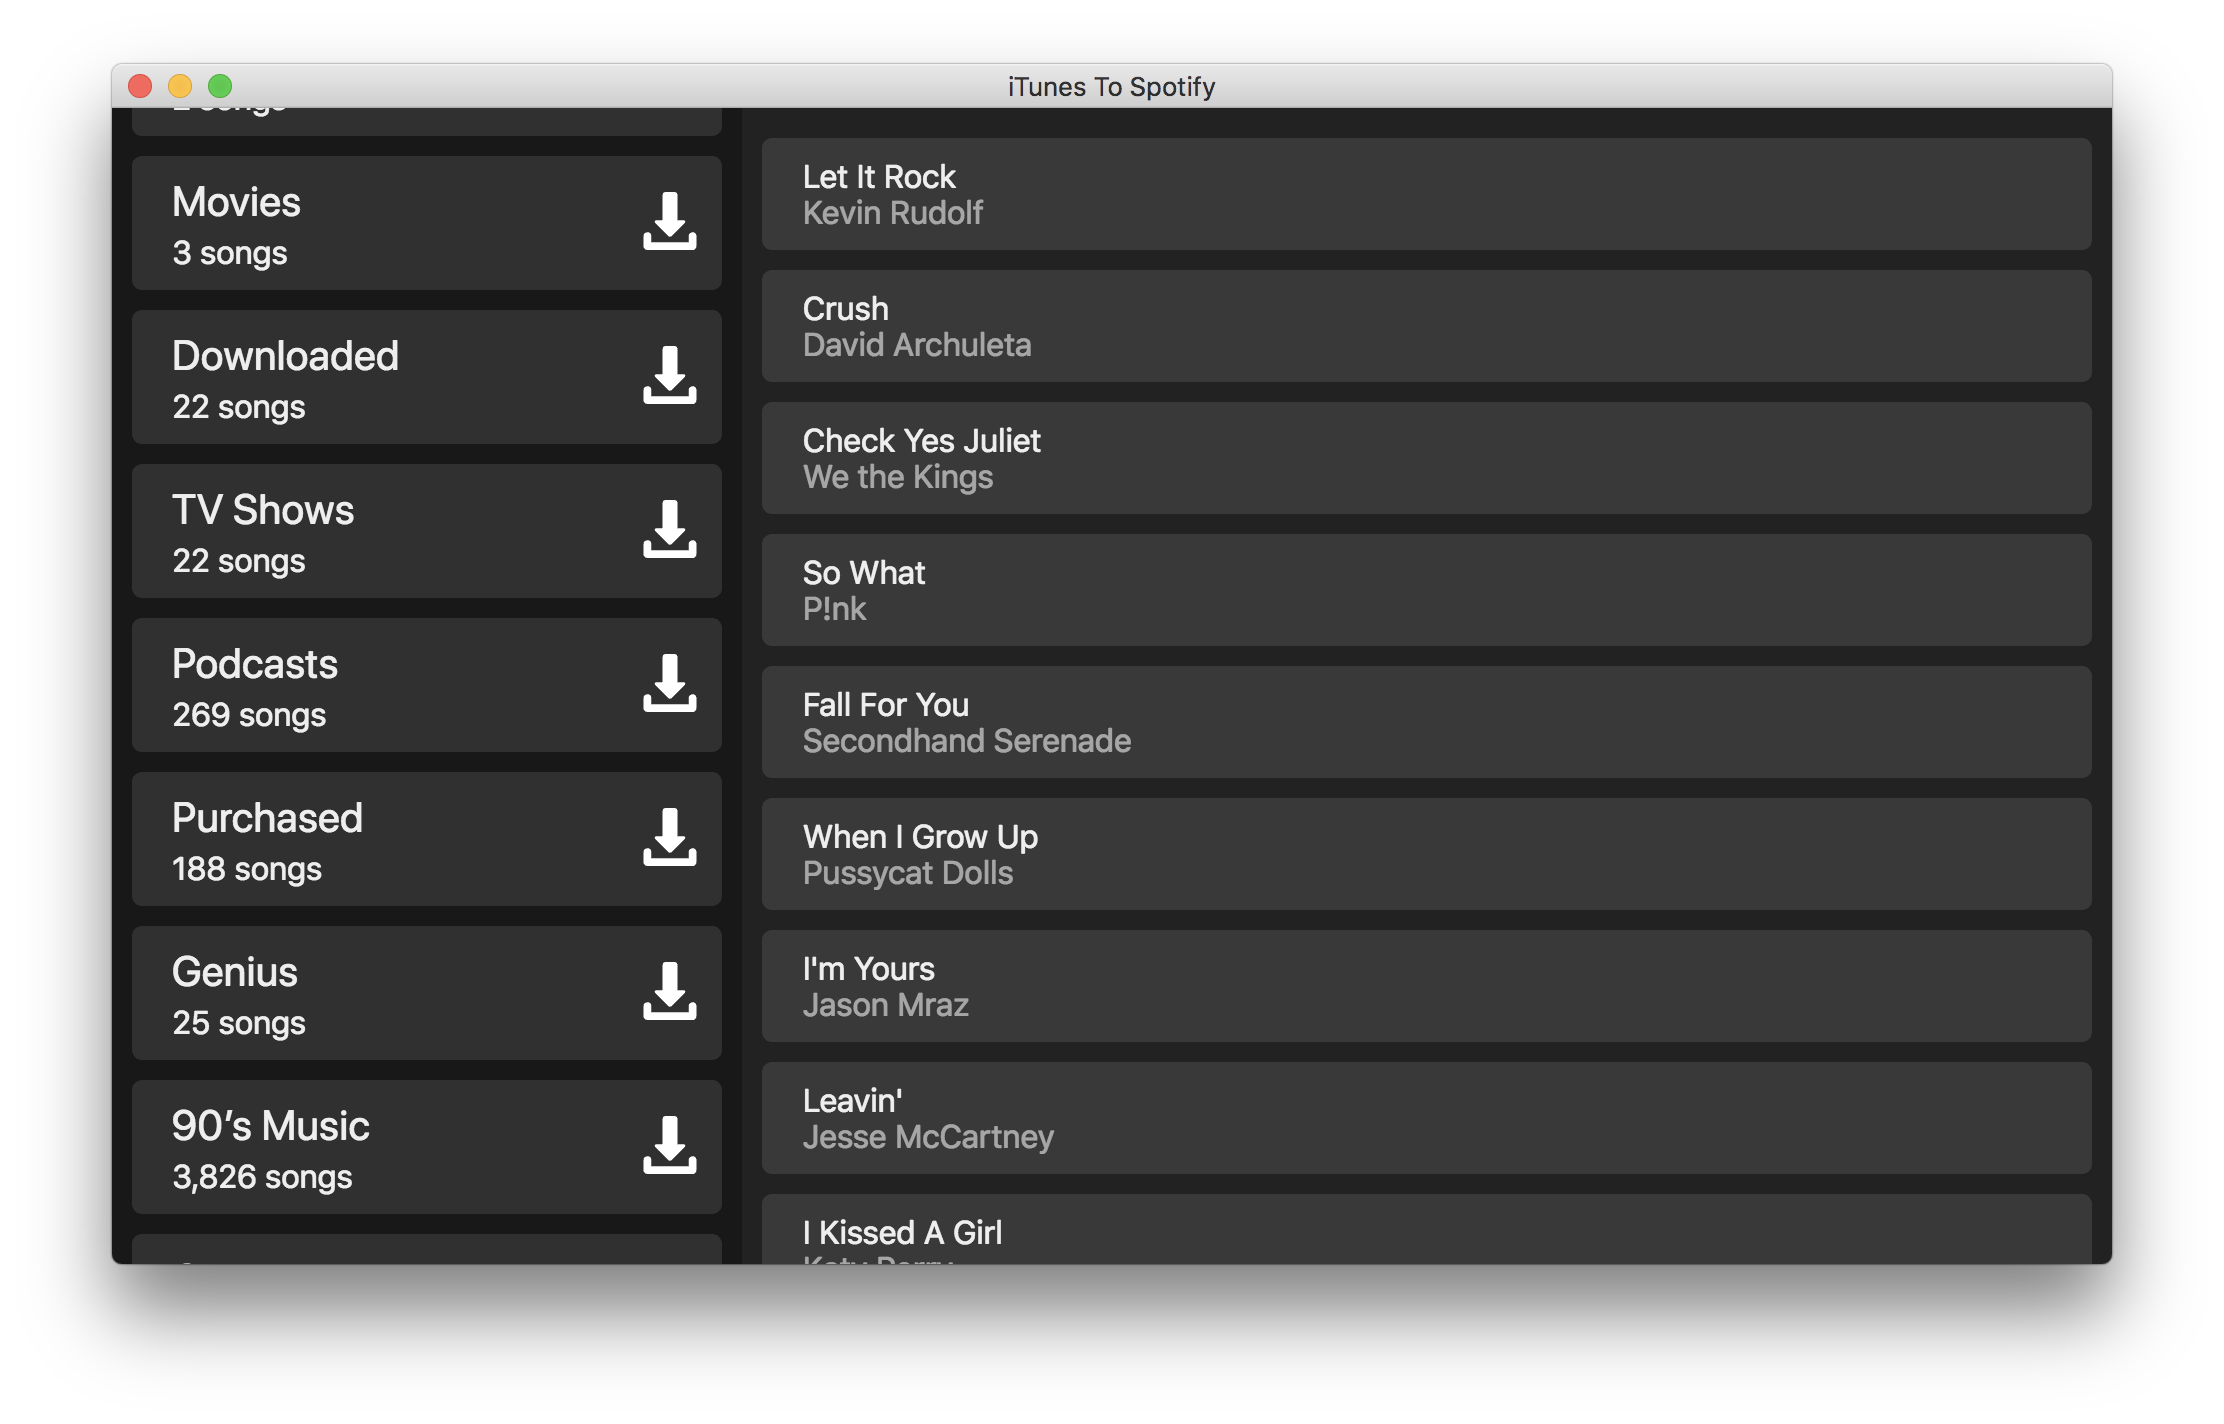 Playlist/track selector view